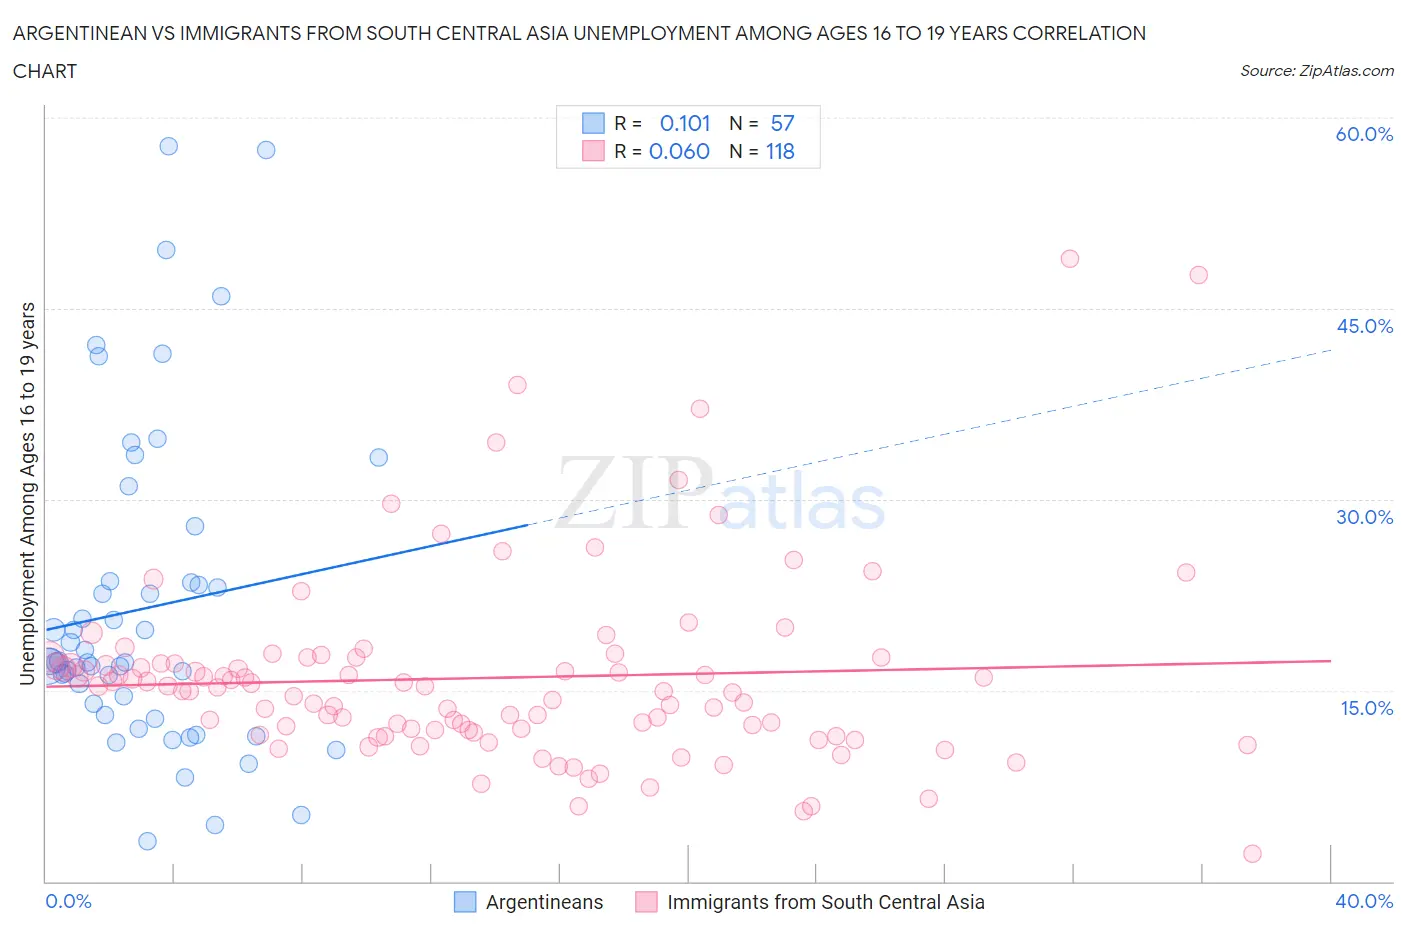 Argentinean vs Immigrants from South Central Asia Unemployment Among Ages 16 to 19 years